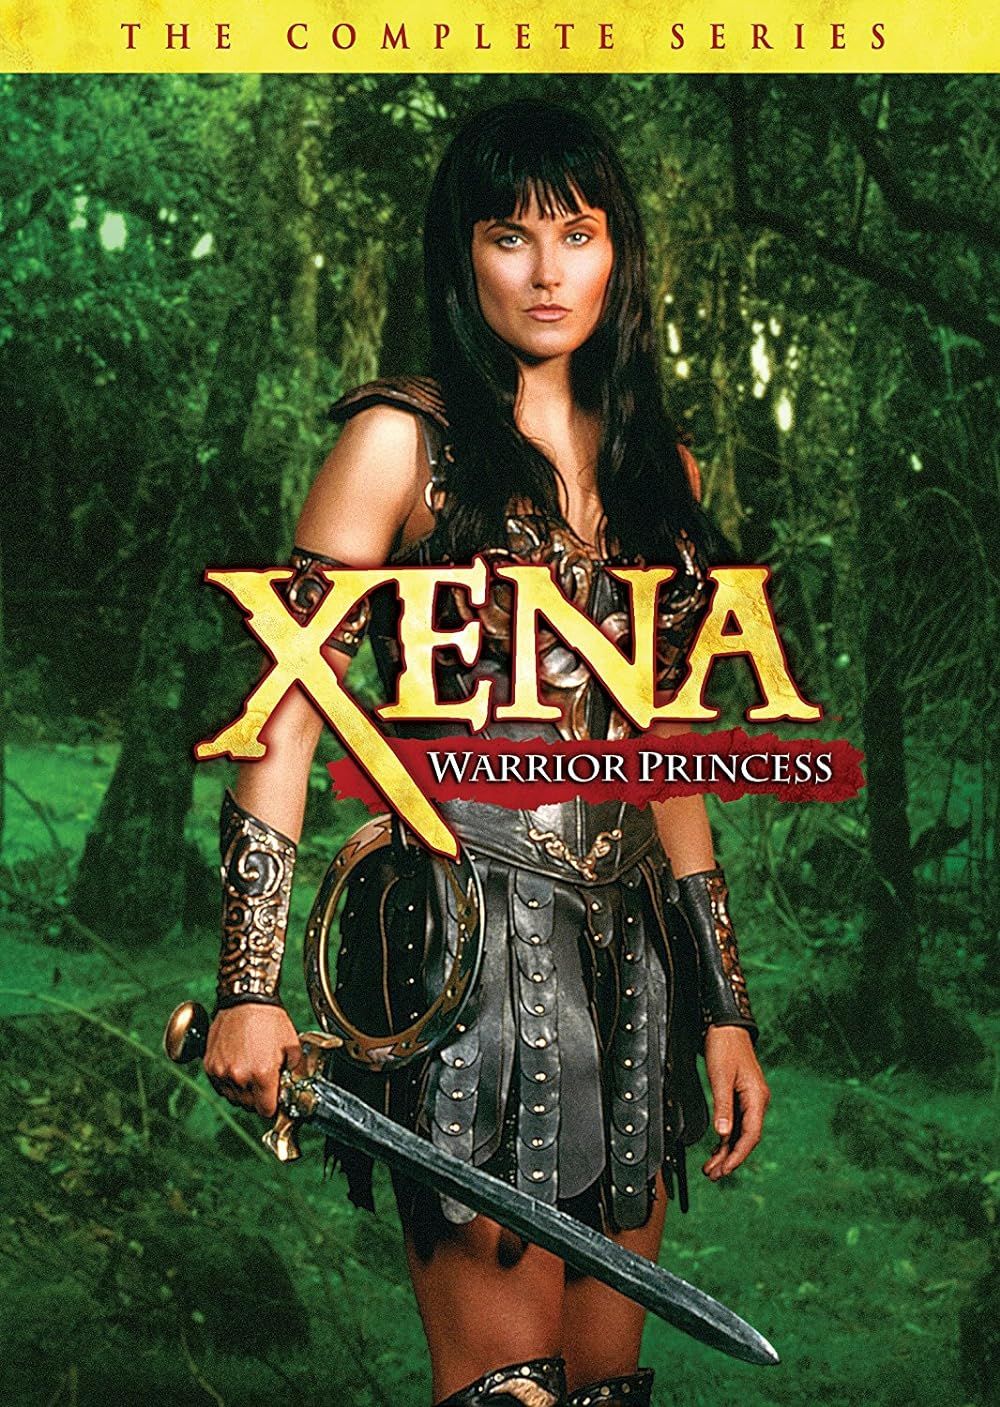 Xena wields her sword on the poster of Xena Warrior Princess the Complete Series